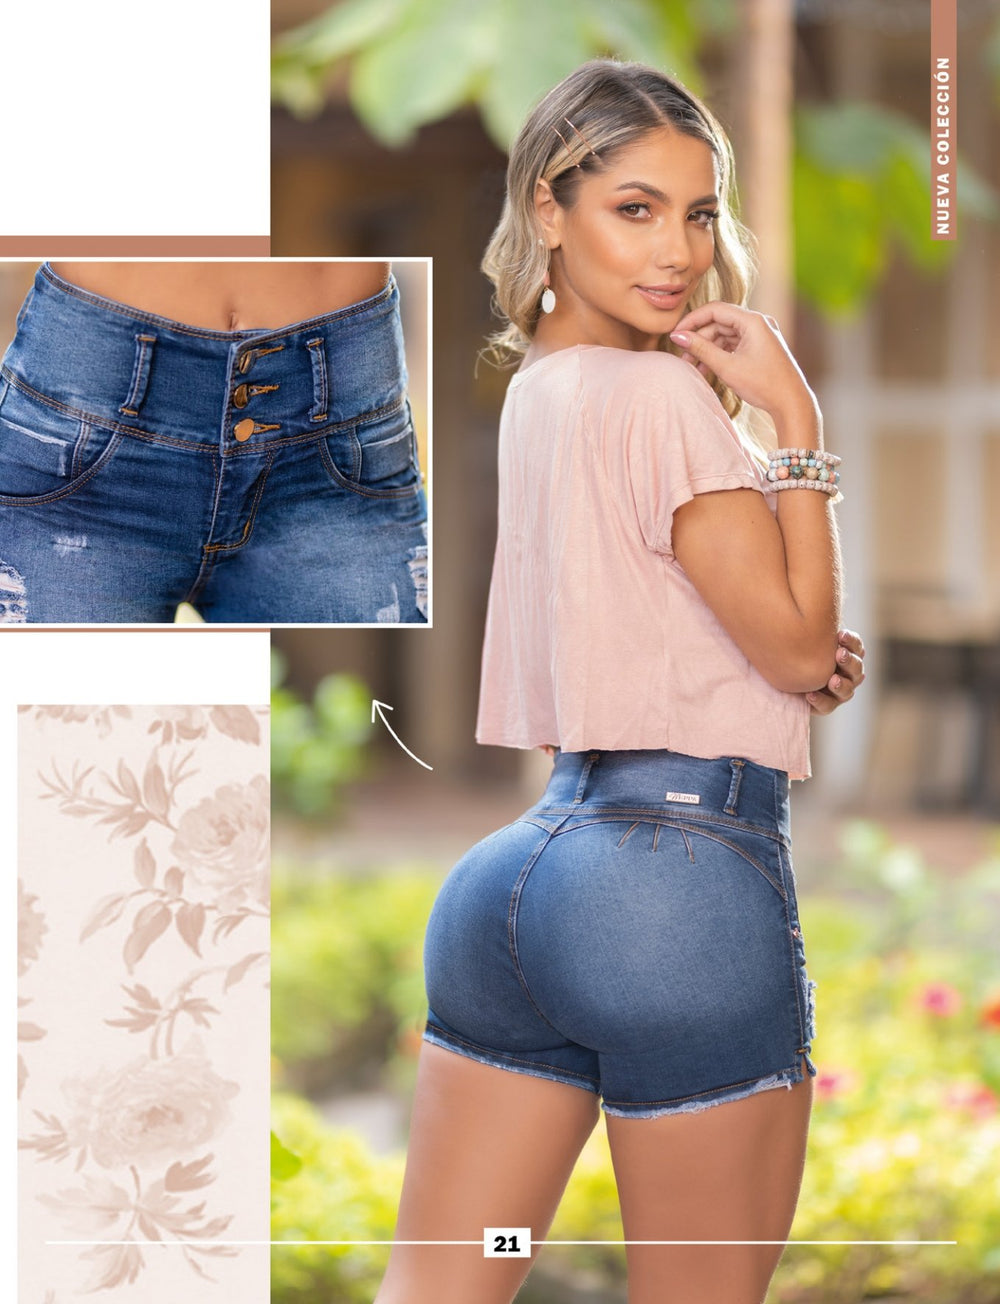 W-83 100% Authentic Colombian Push Up Shorts by Weppa Jeans - JDColFashion